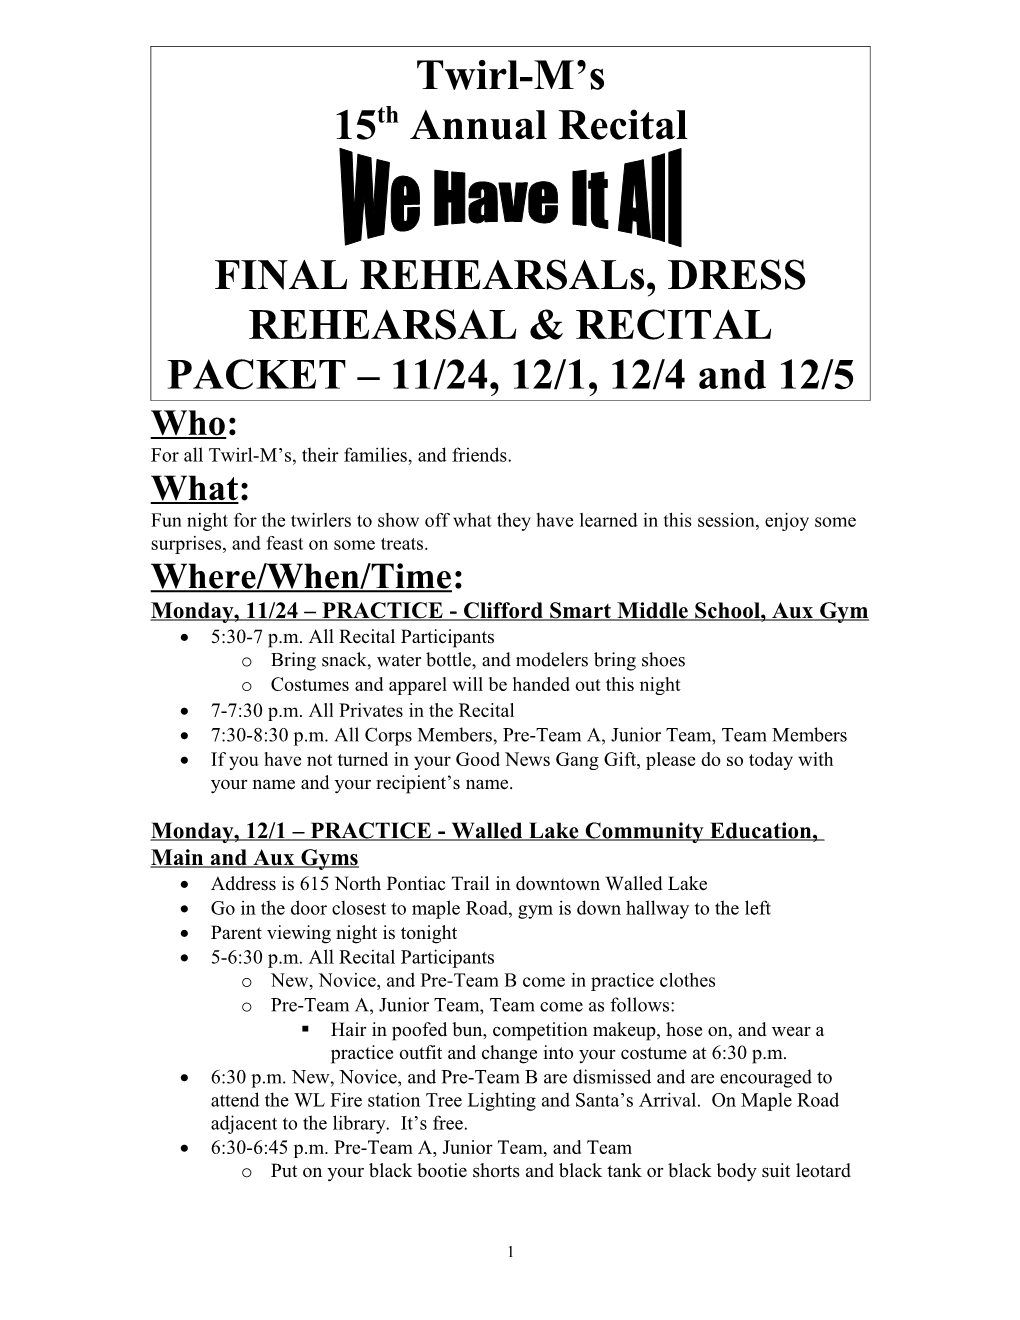 FINAL Rehearsals, DRESS REHEARSAL & RECITAL PACKET 11/24, 12/1, 12/4 and 12/5